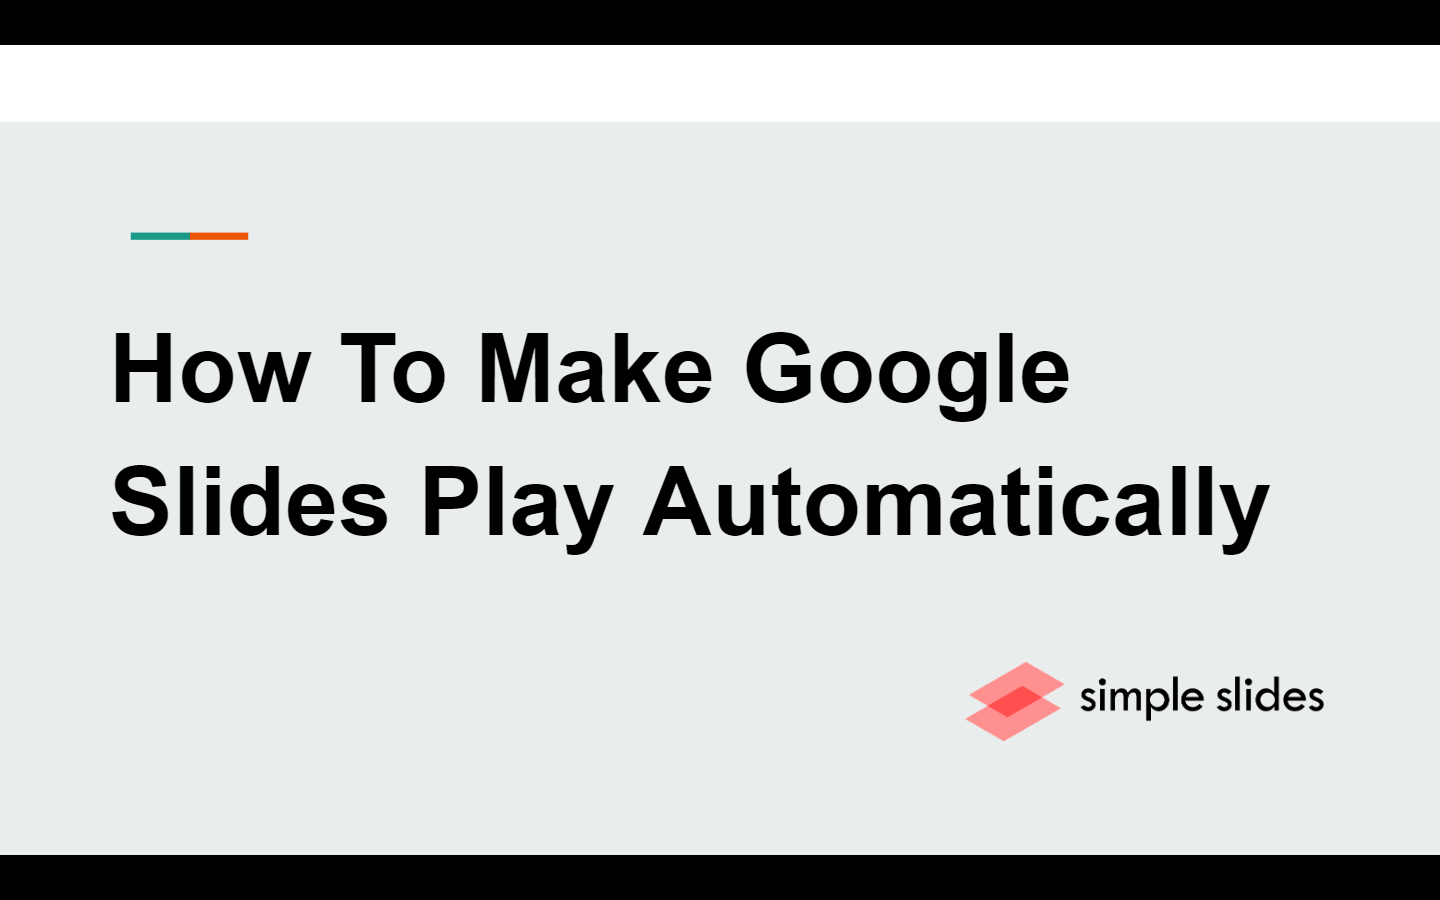 Your Google Slides will play automatically after that